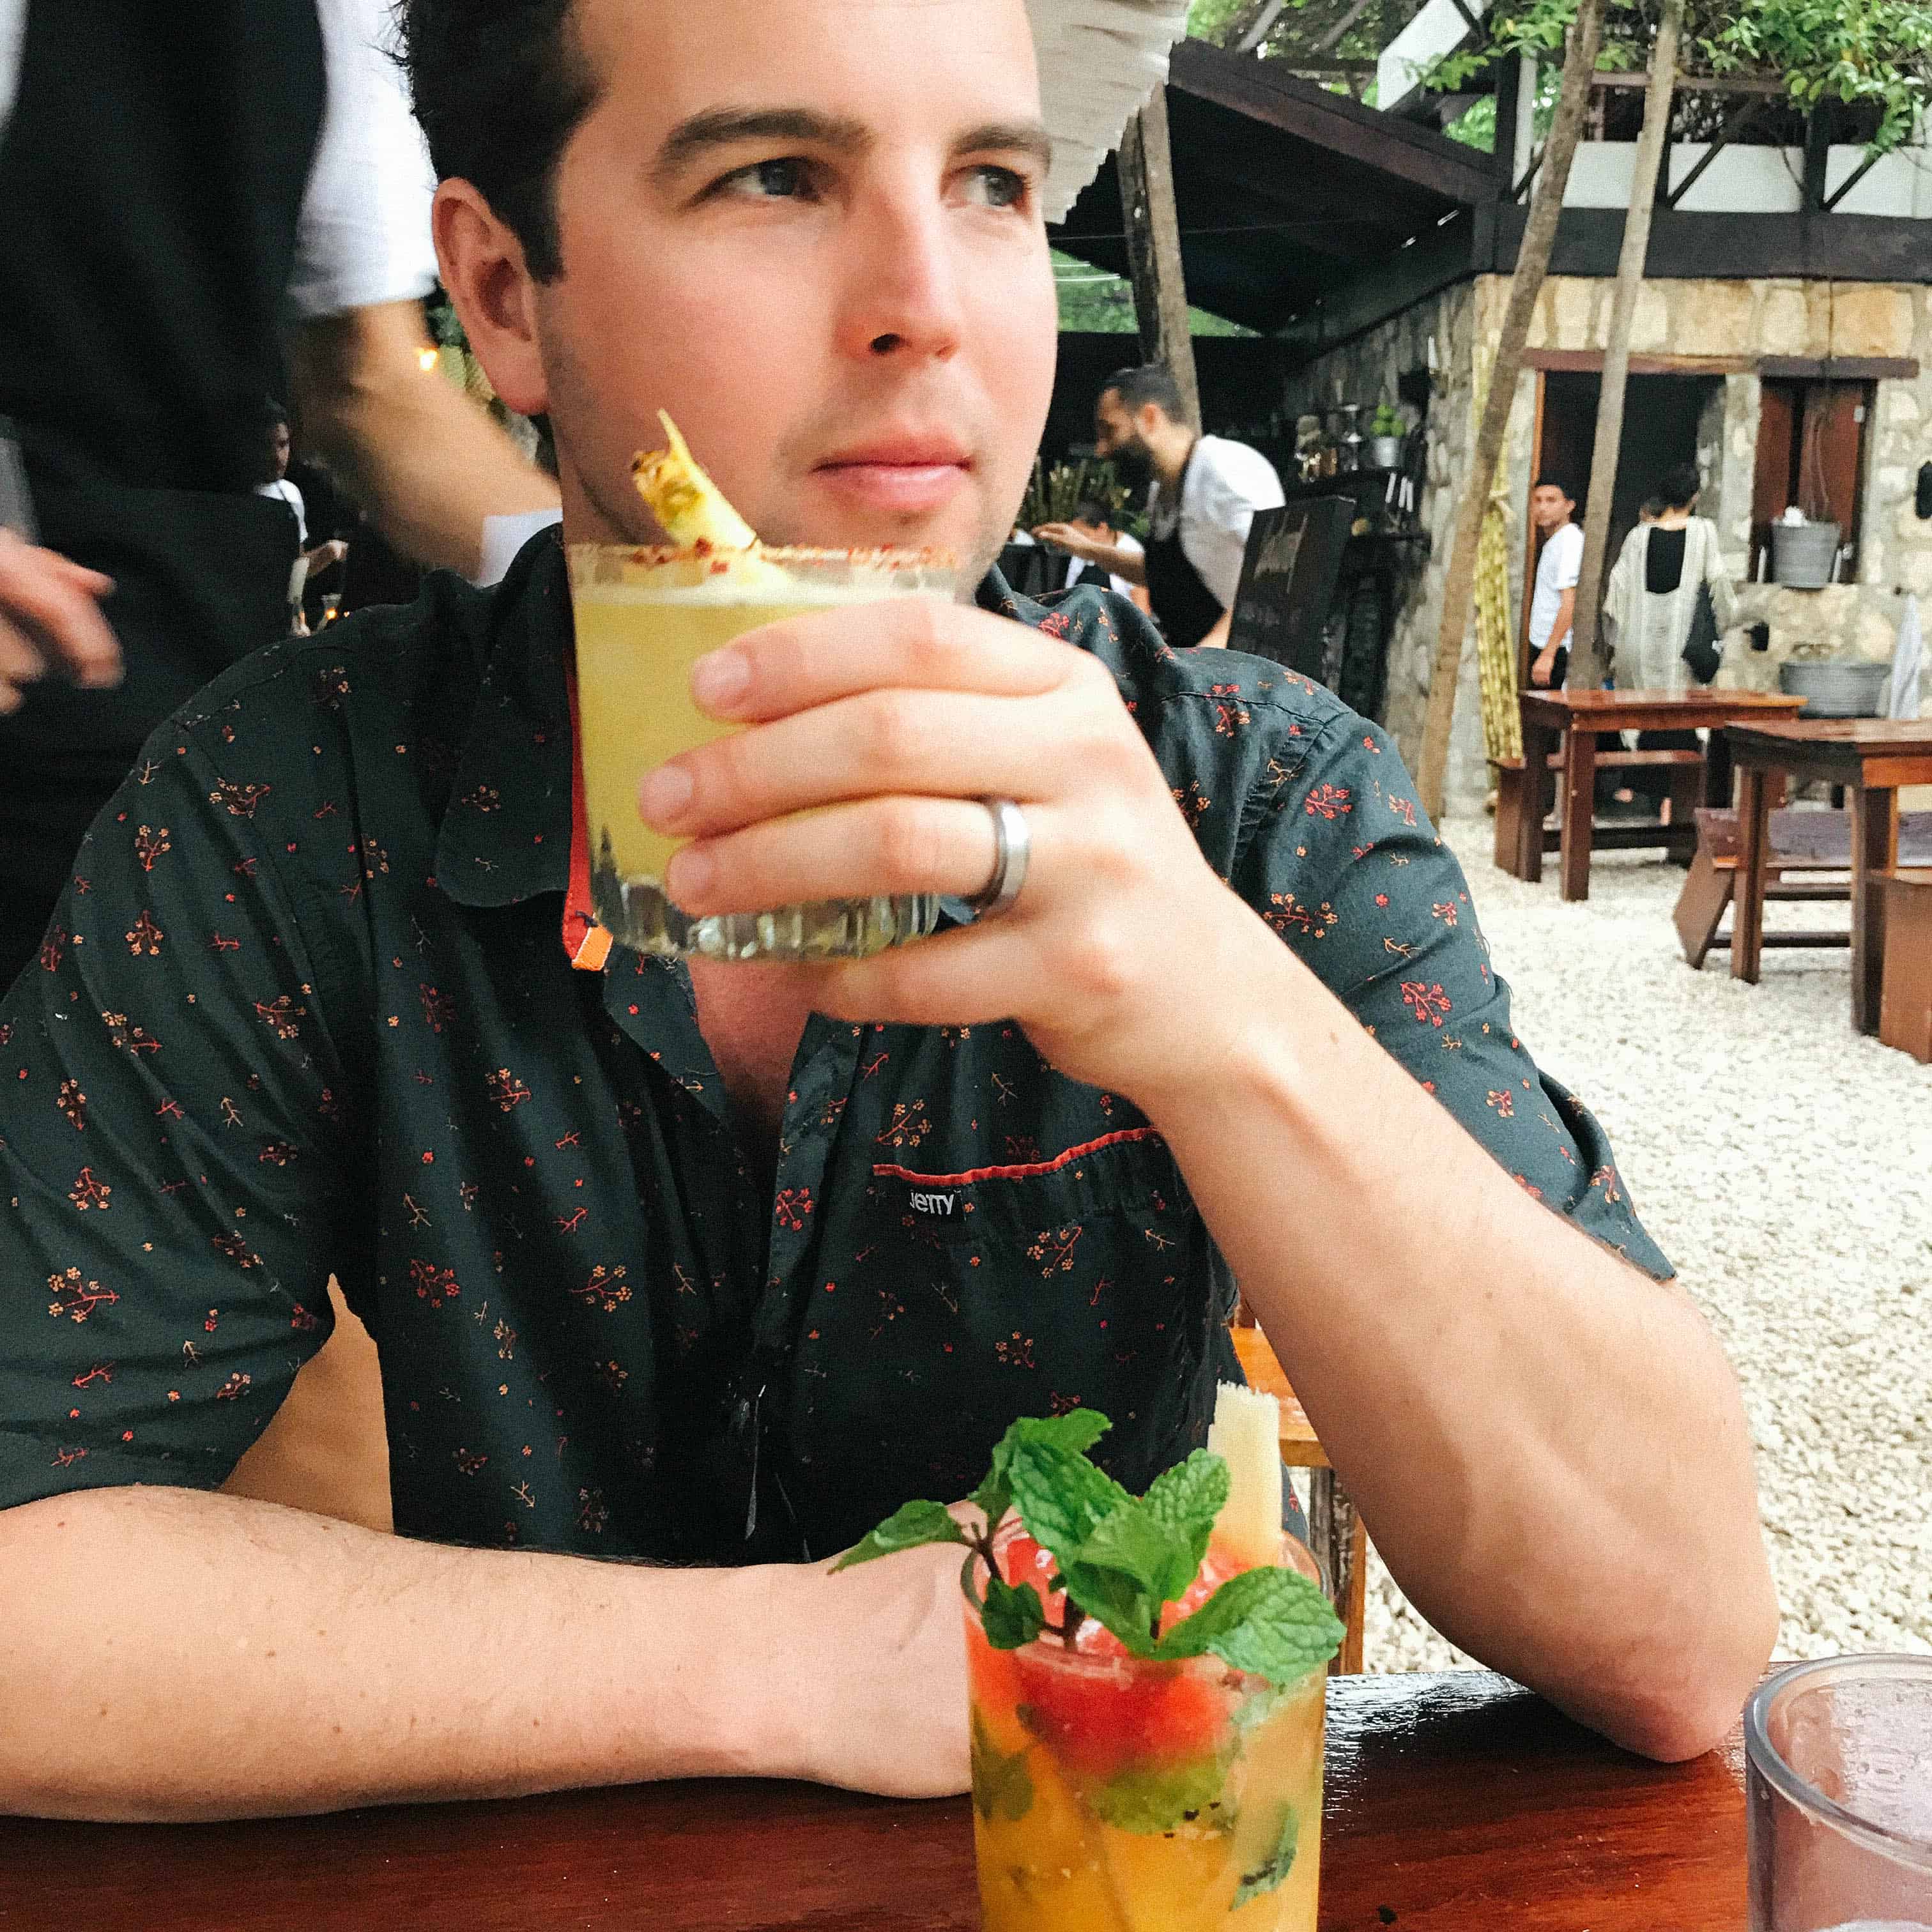 A man having a cocktail outside at a restaurant table.